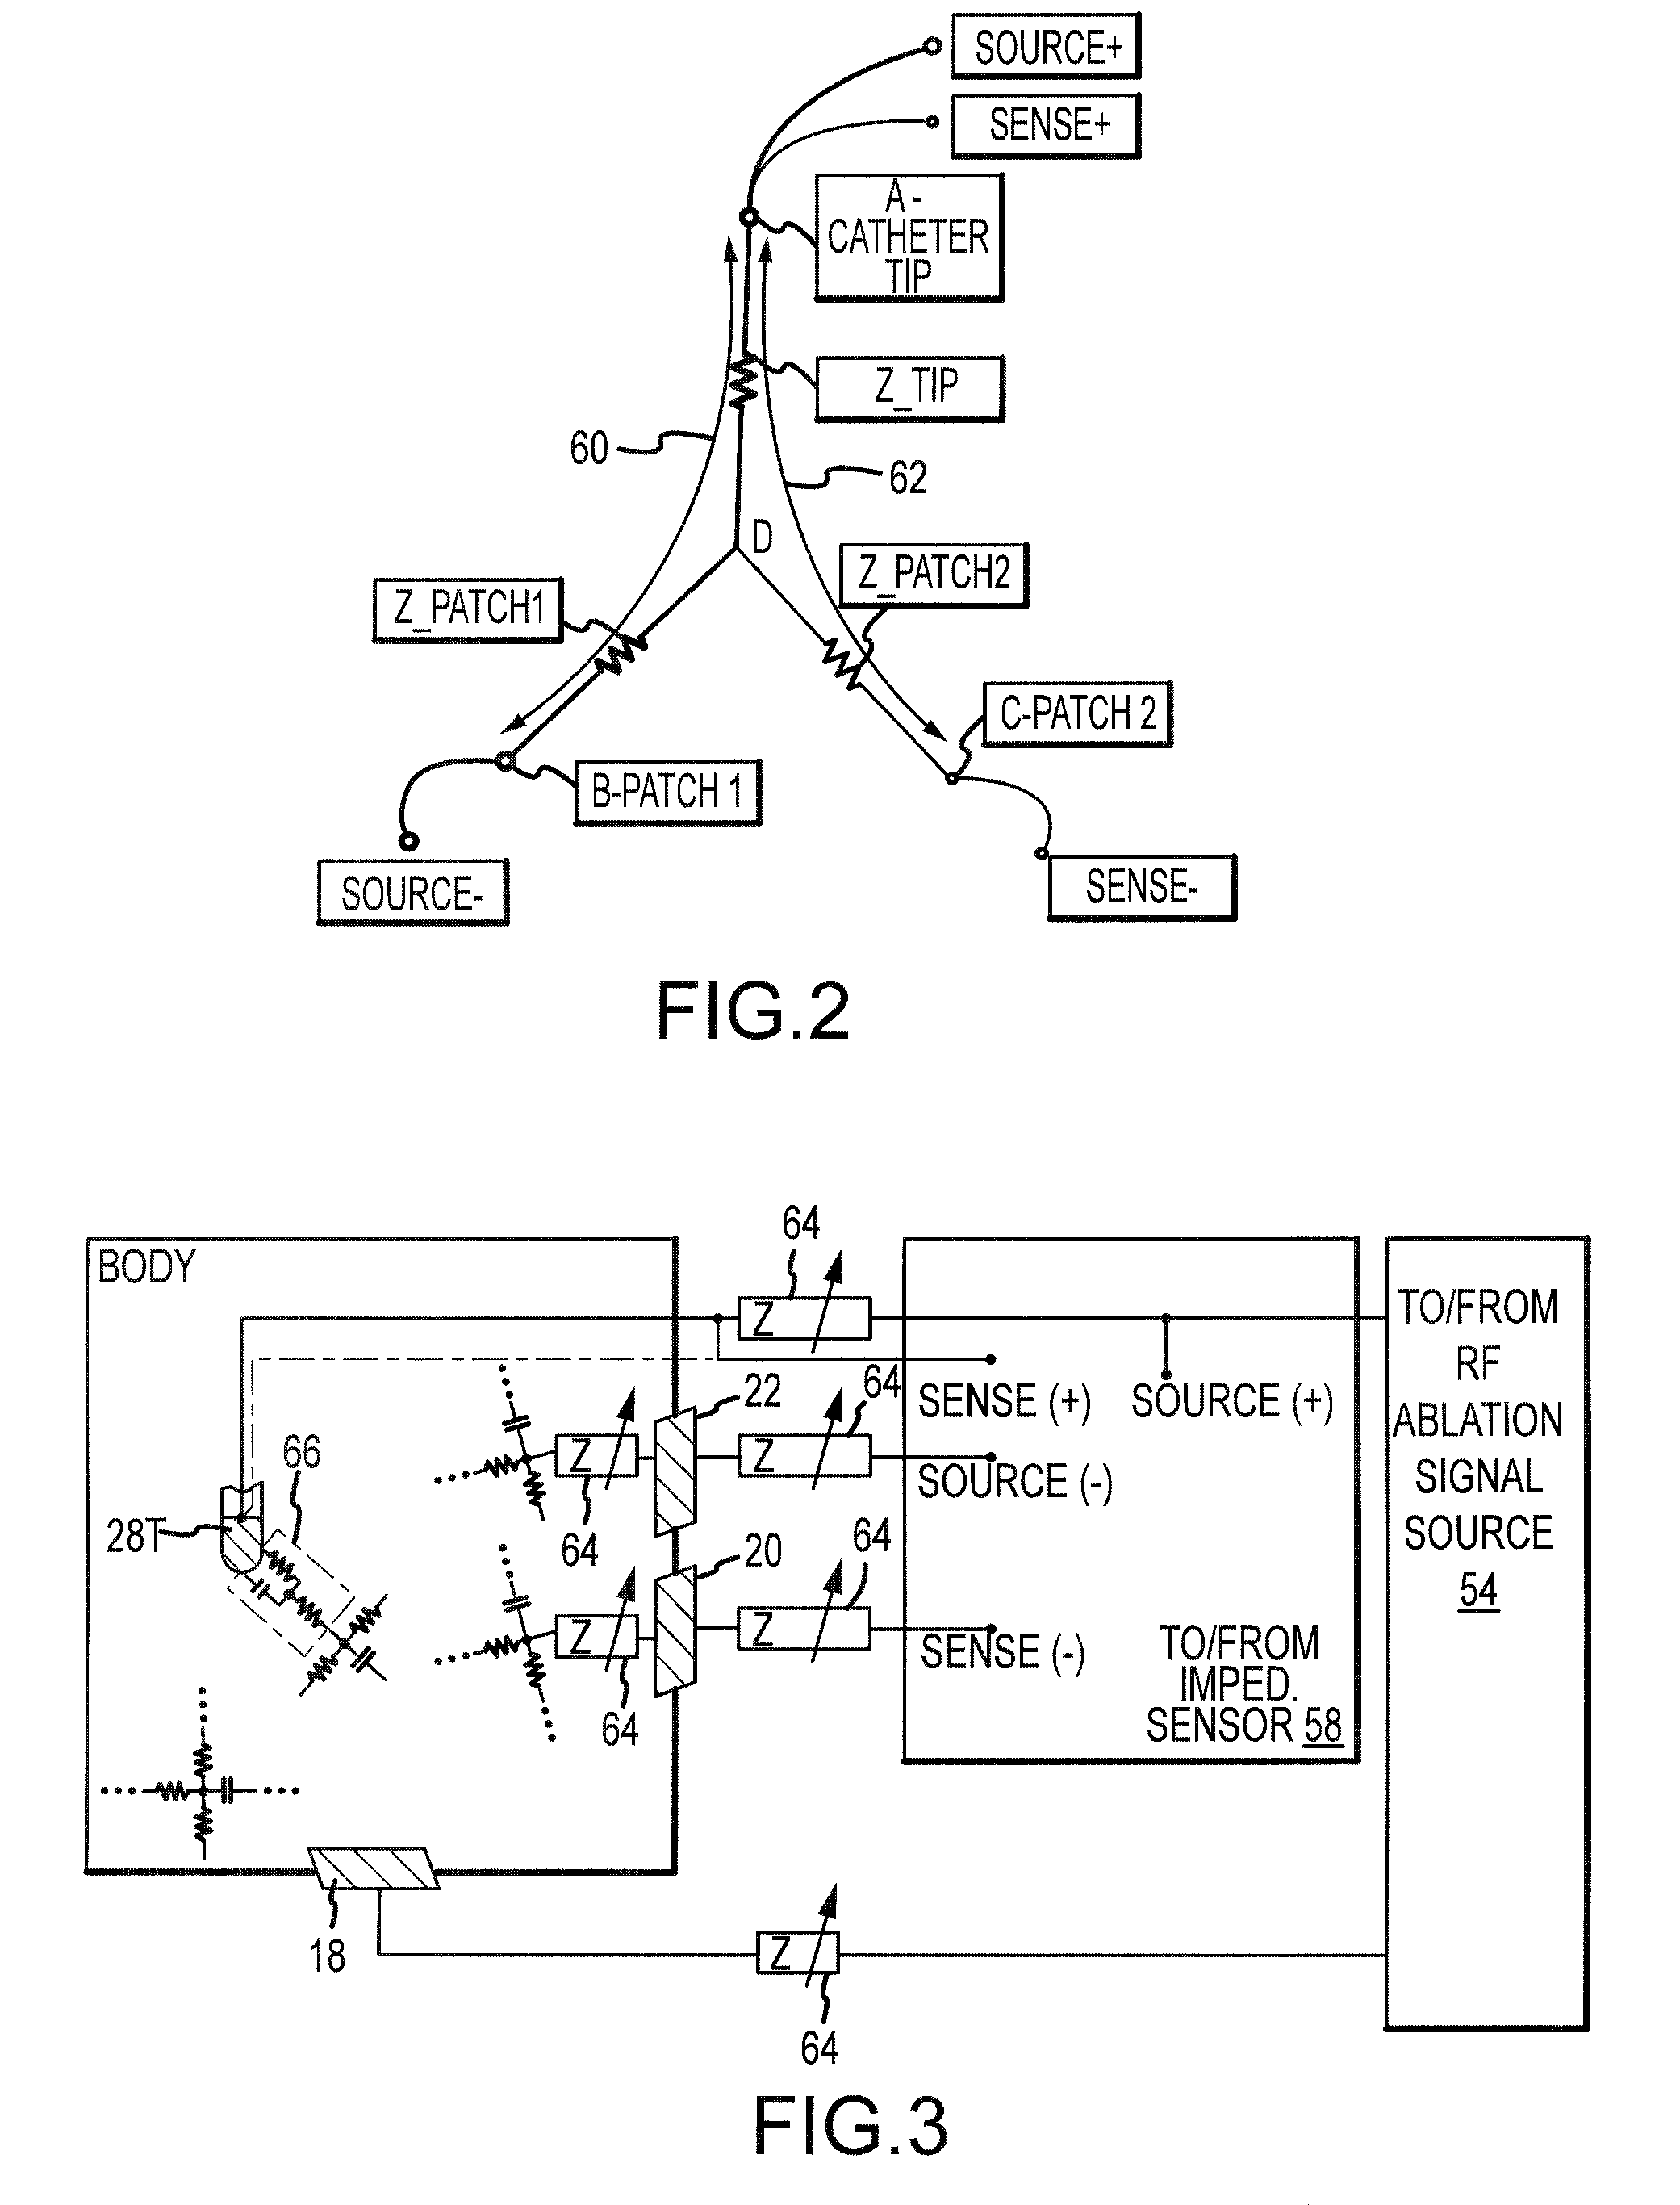 System and method for assessing coupling between an electrode and tissue